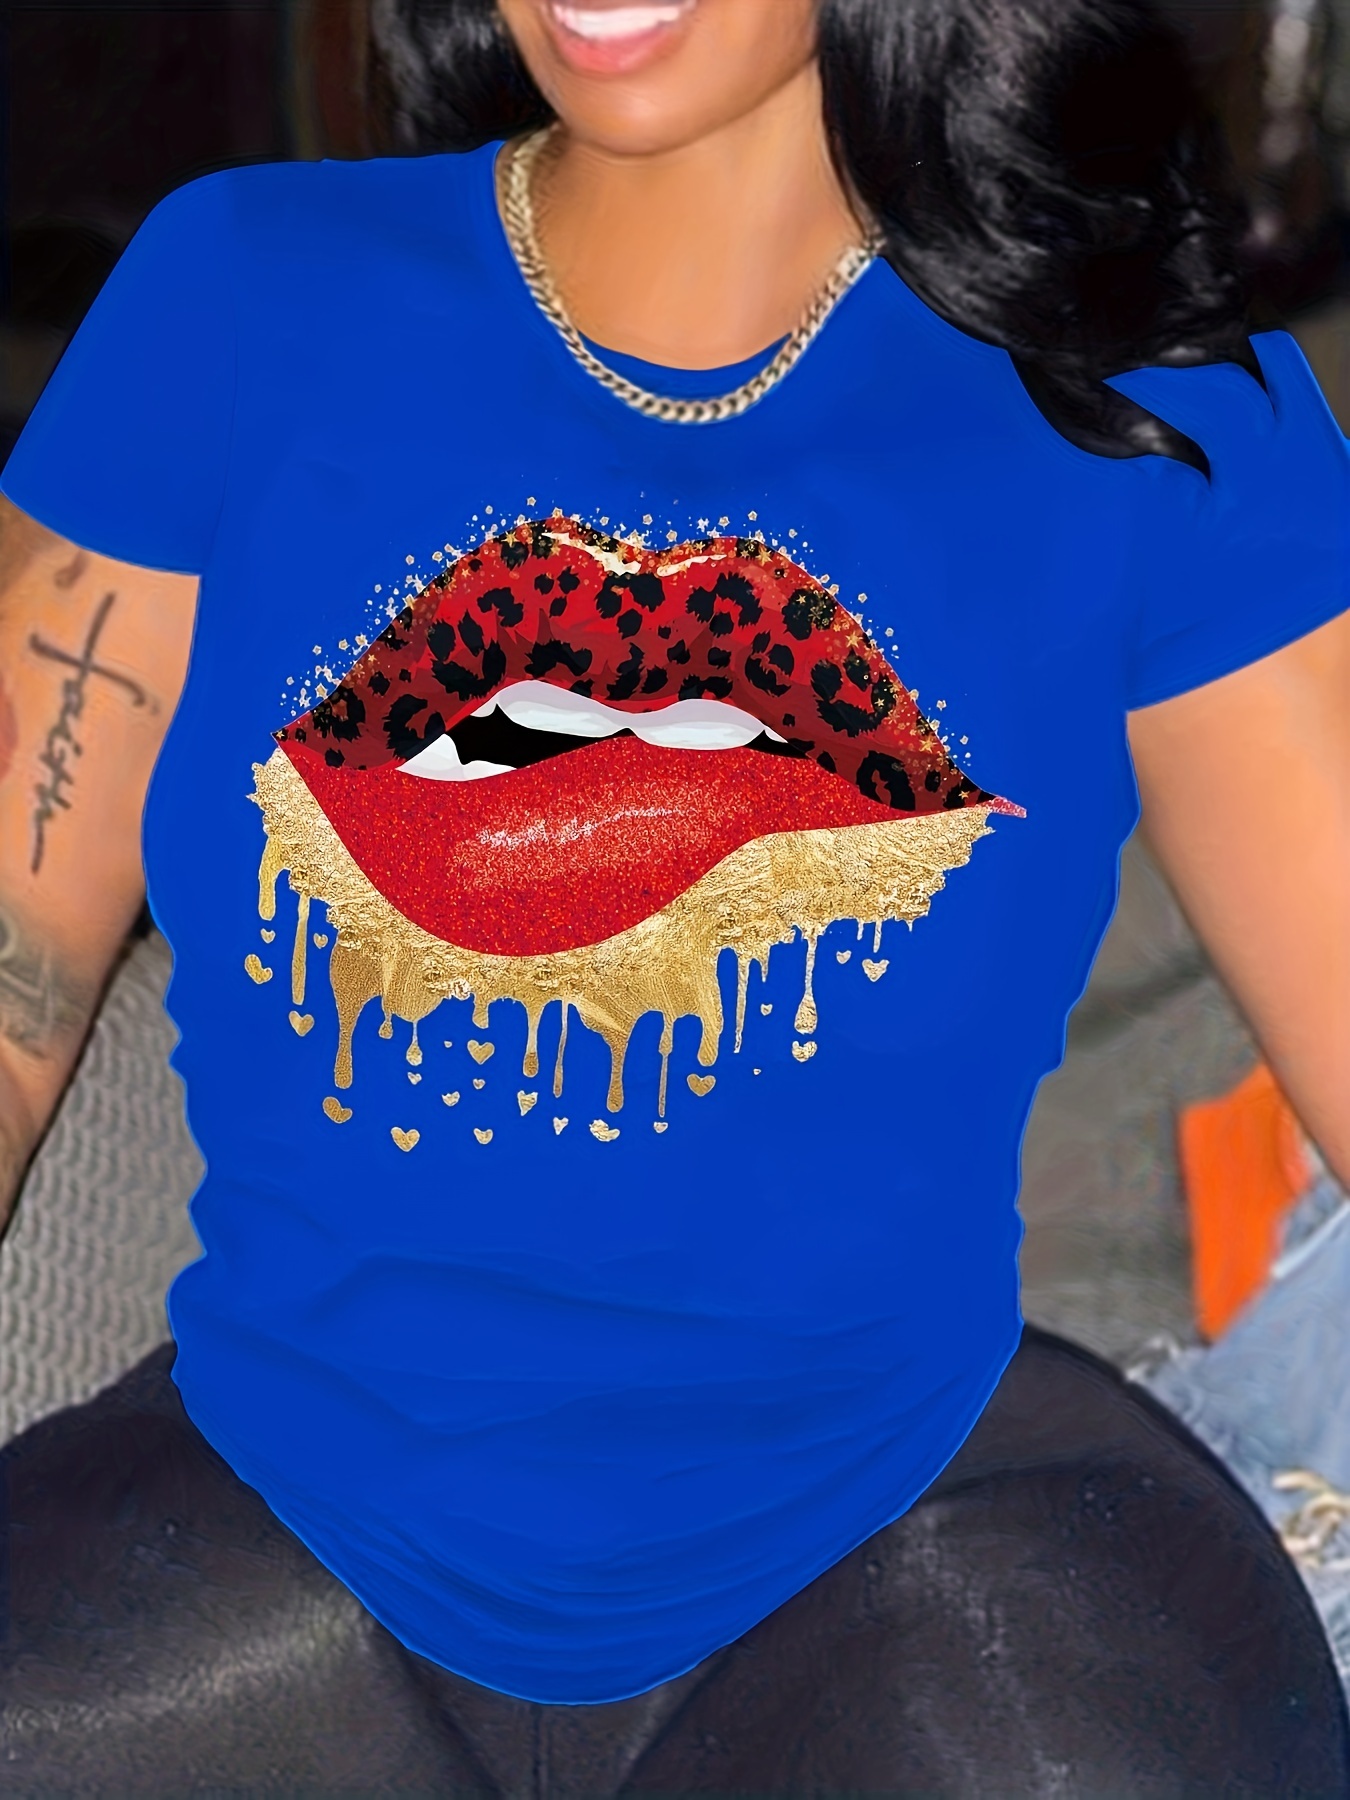 Dropship Plus Size Sexy T-shirt; Women's Plus Leopard Print Long Sleeve  Ripped Drawstring T-shirt to Sell Online at a Lower Price